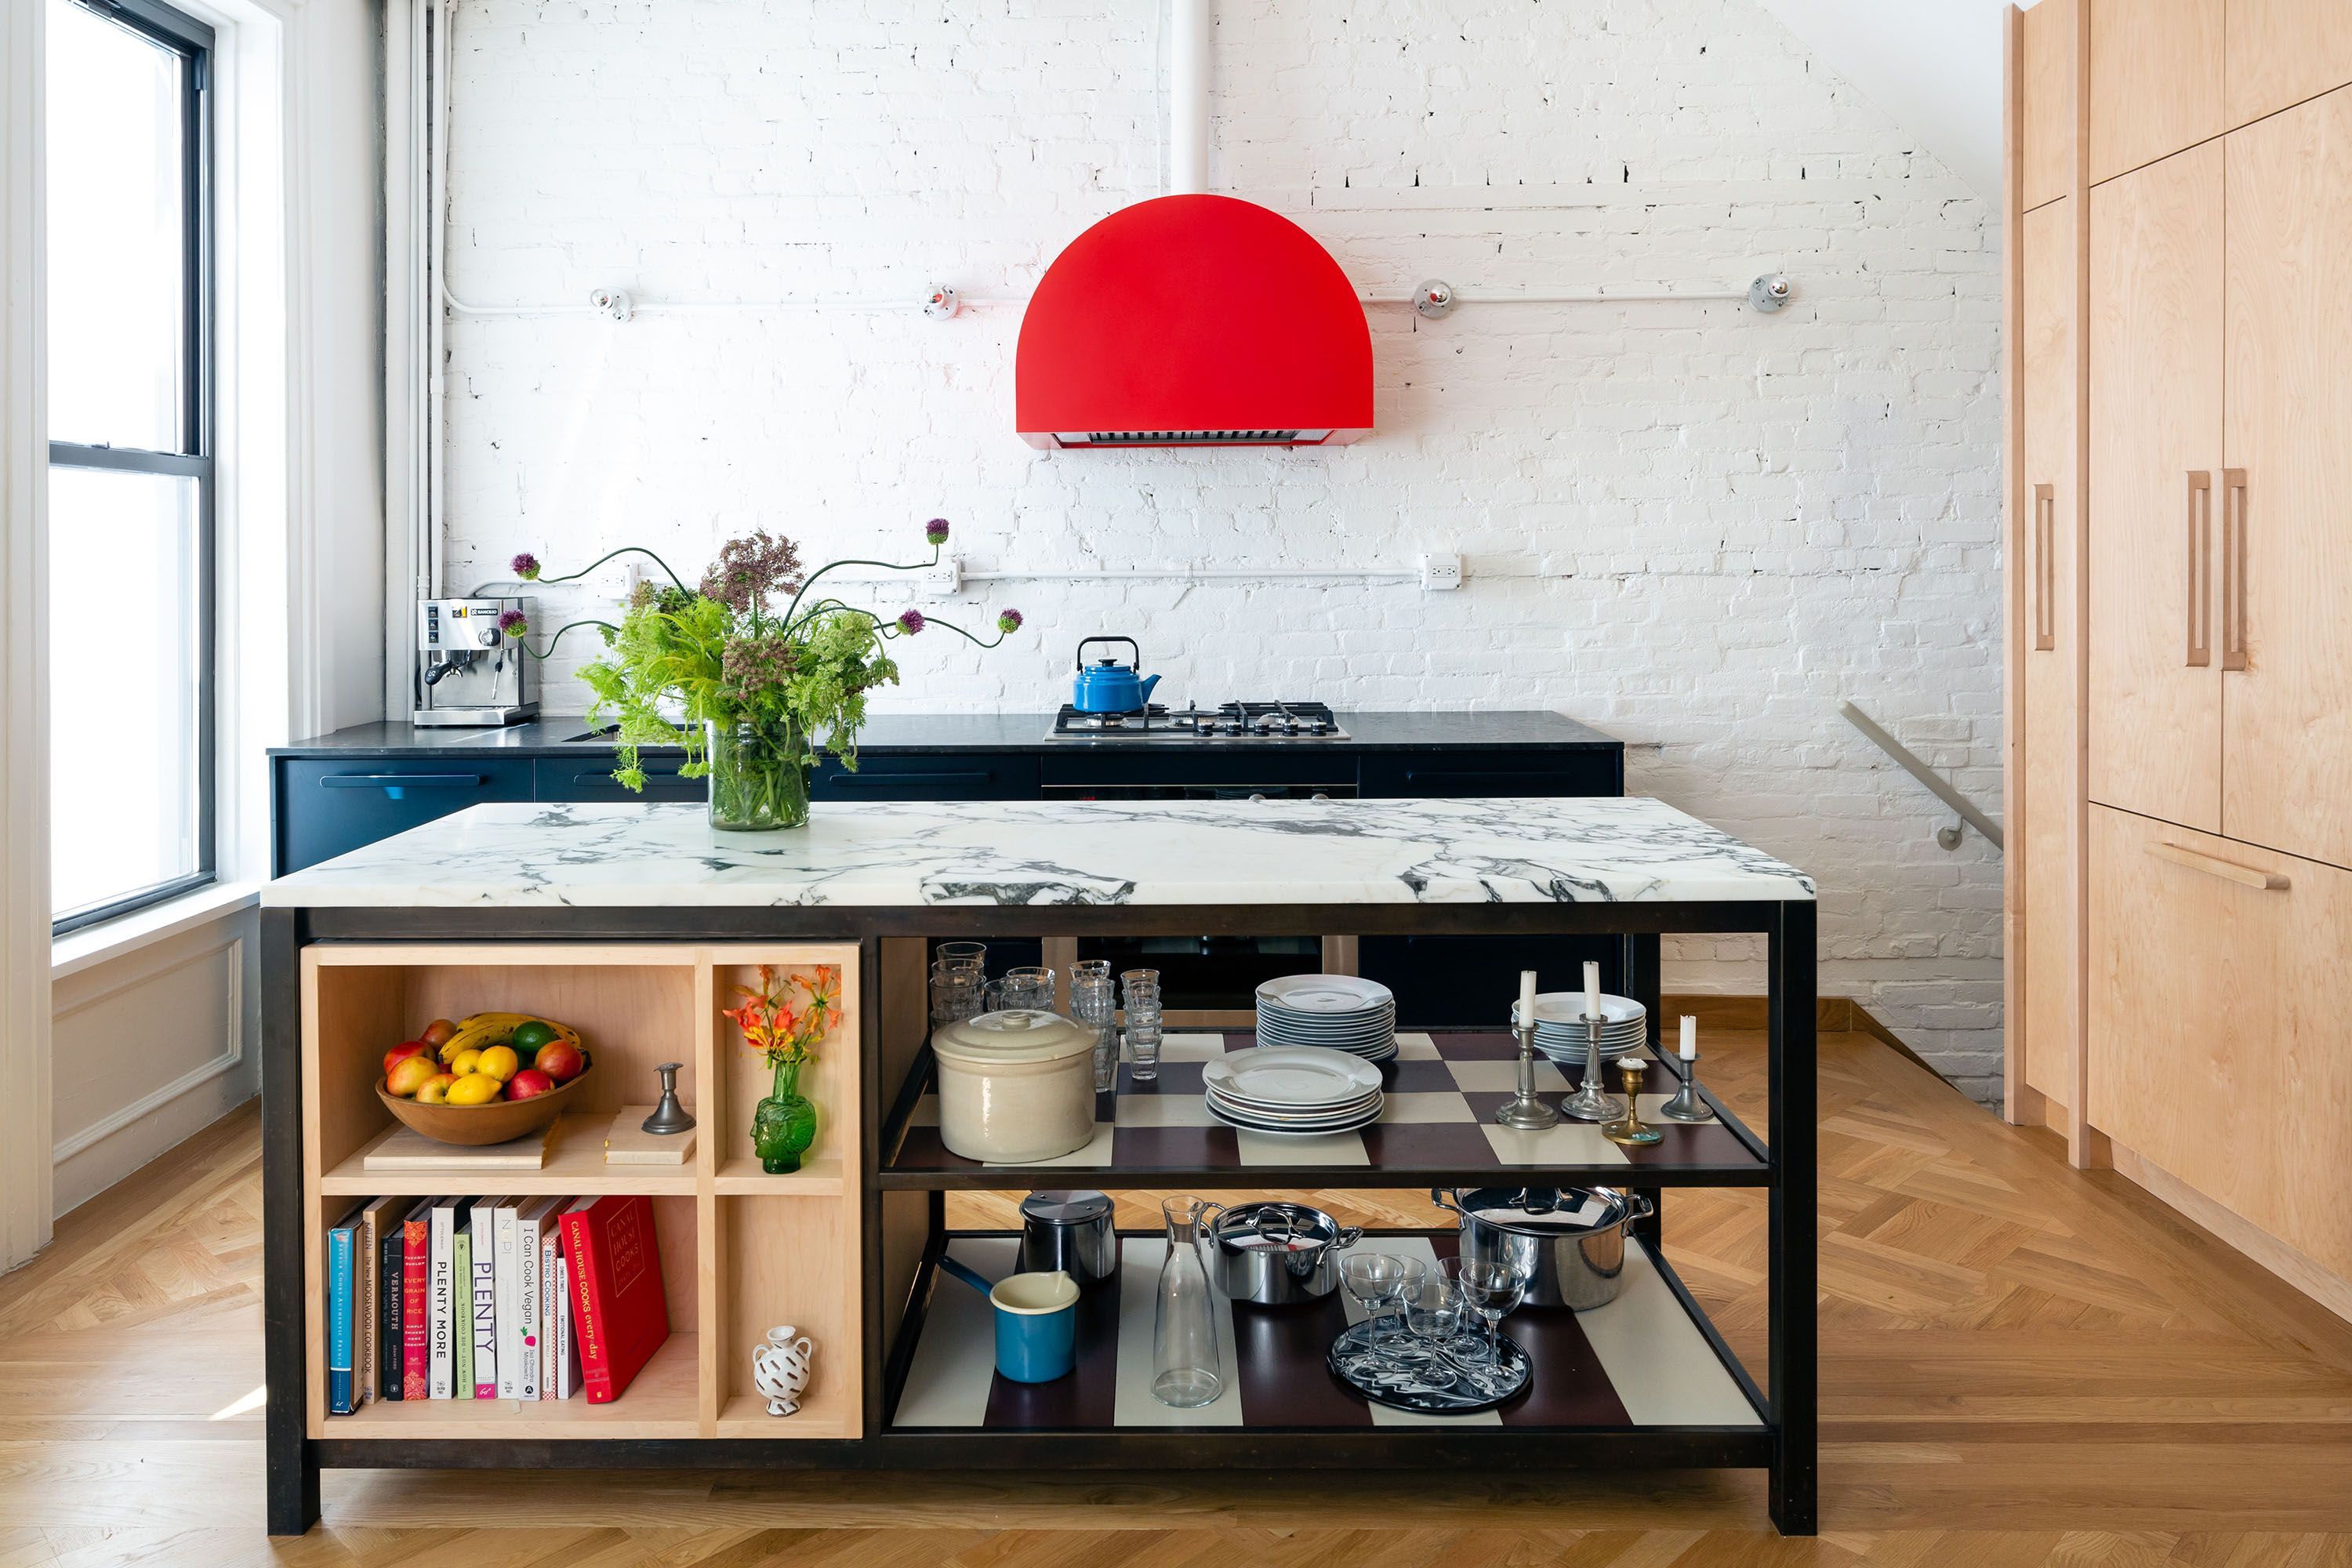 20 Small Kitchen Ideas to Make the Most of Your Cooking Space